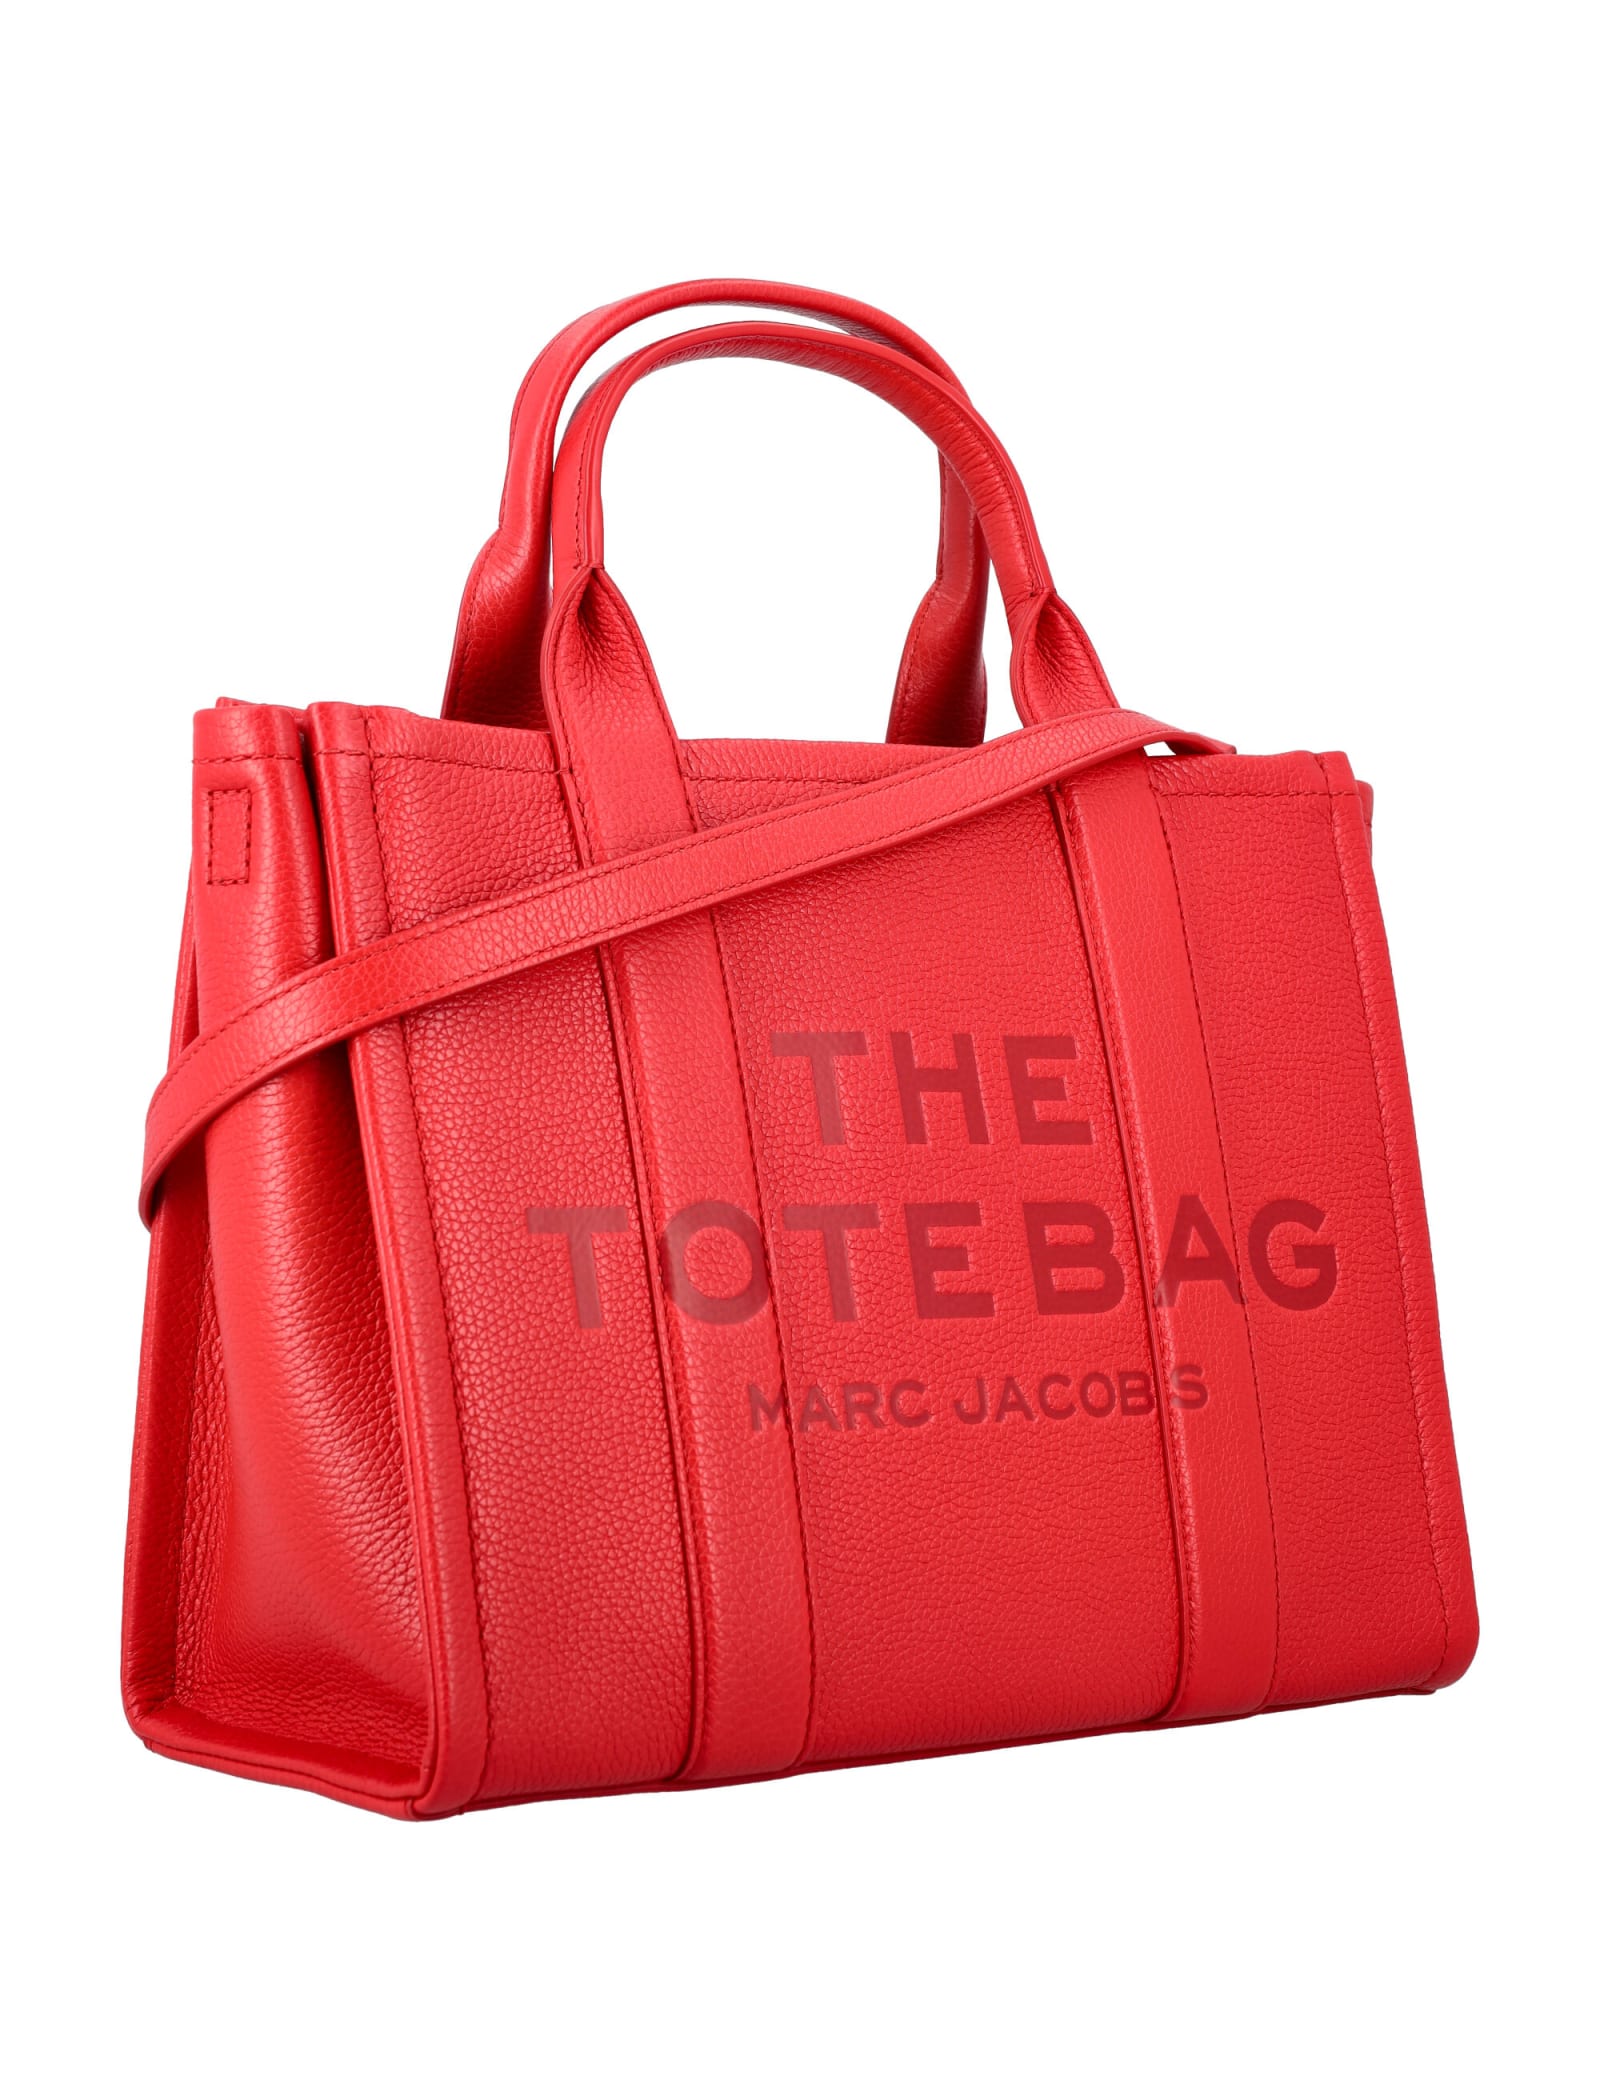 Shop Marc Jacobs The Leather Medium Tote Bag In Red